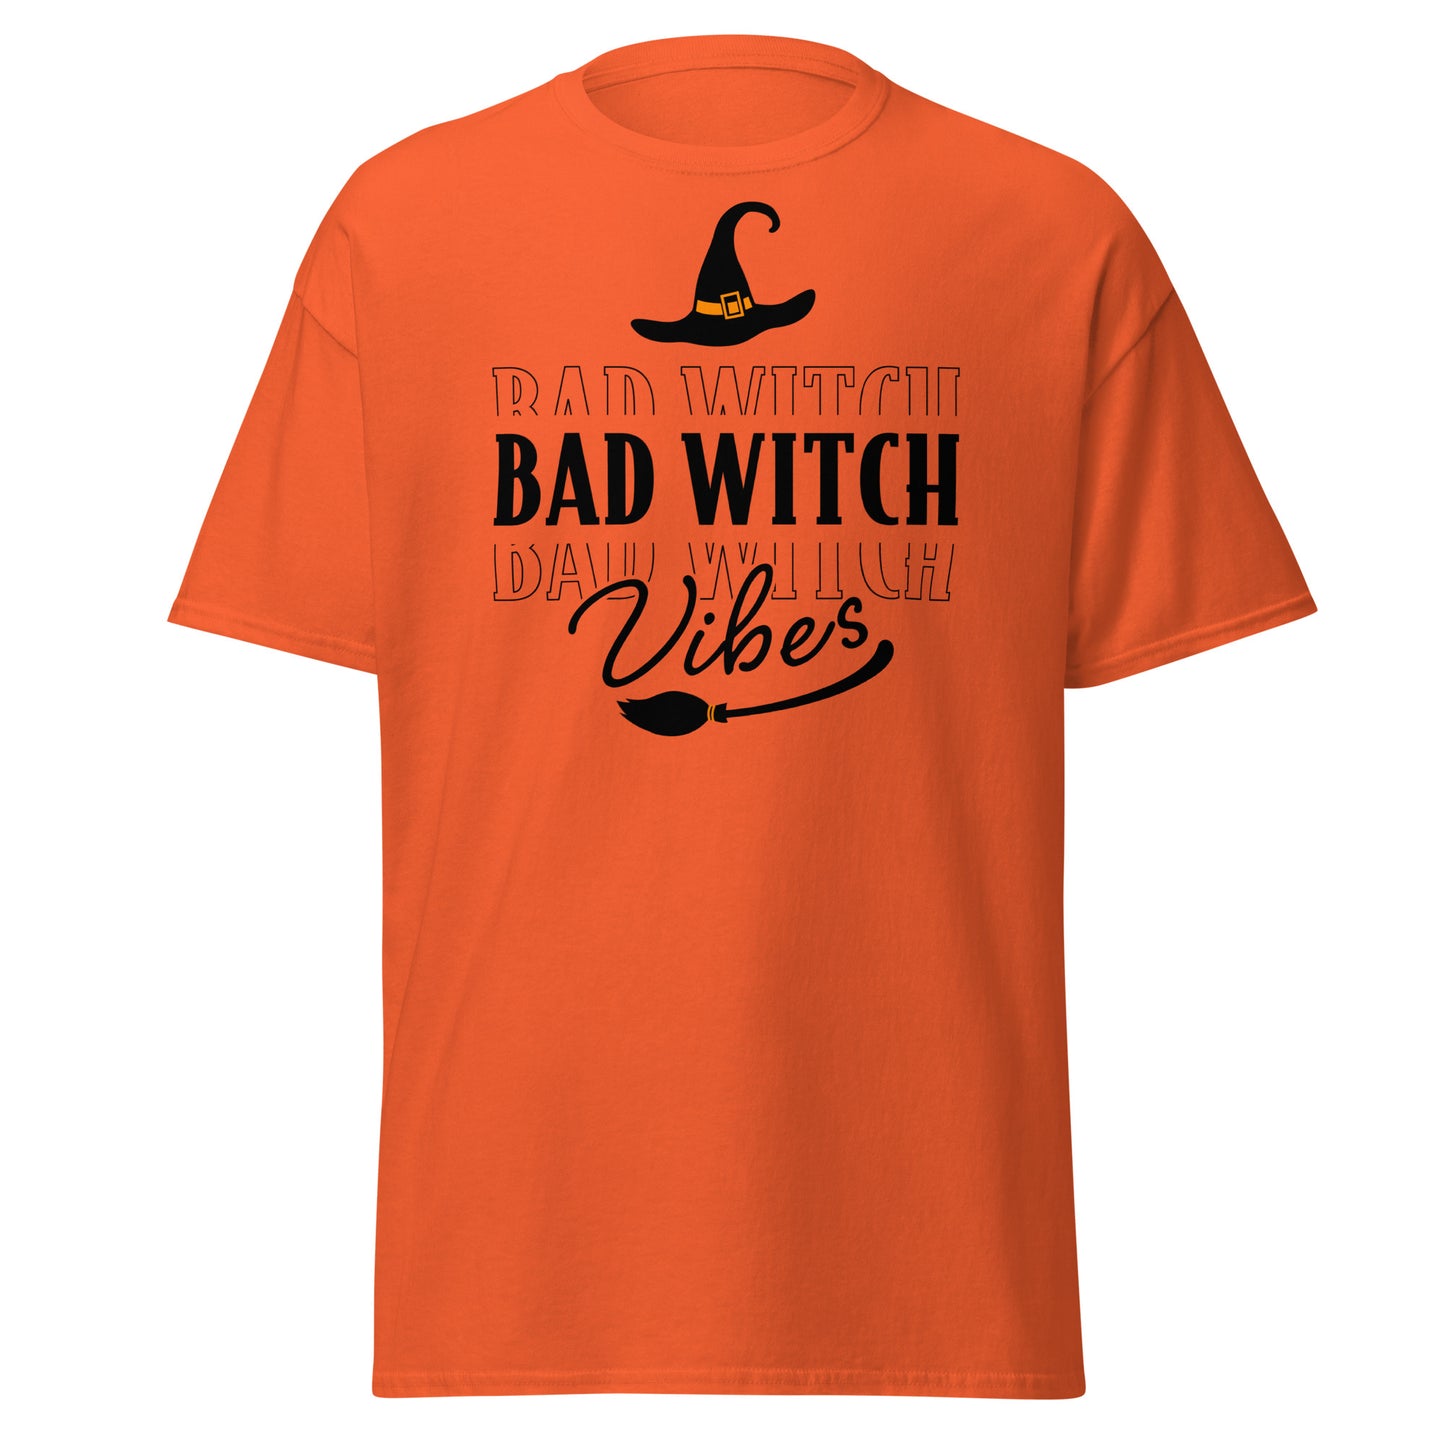 Bad Witch Vibes' Tee: Embrace the Dark Magic this Halloween